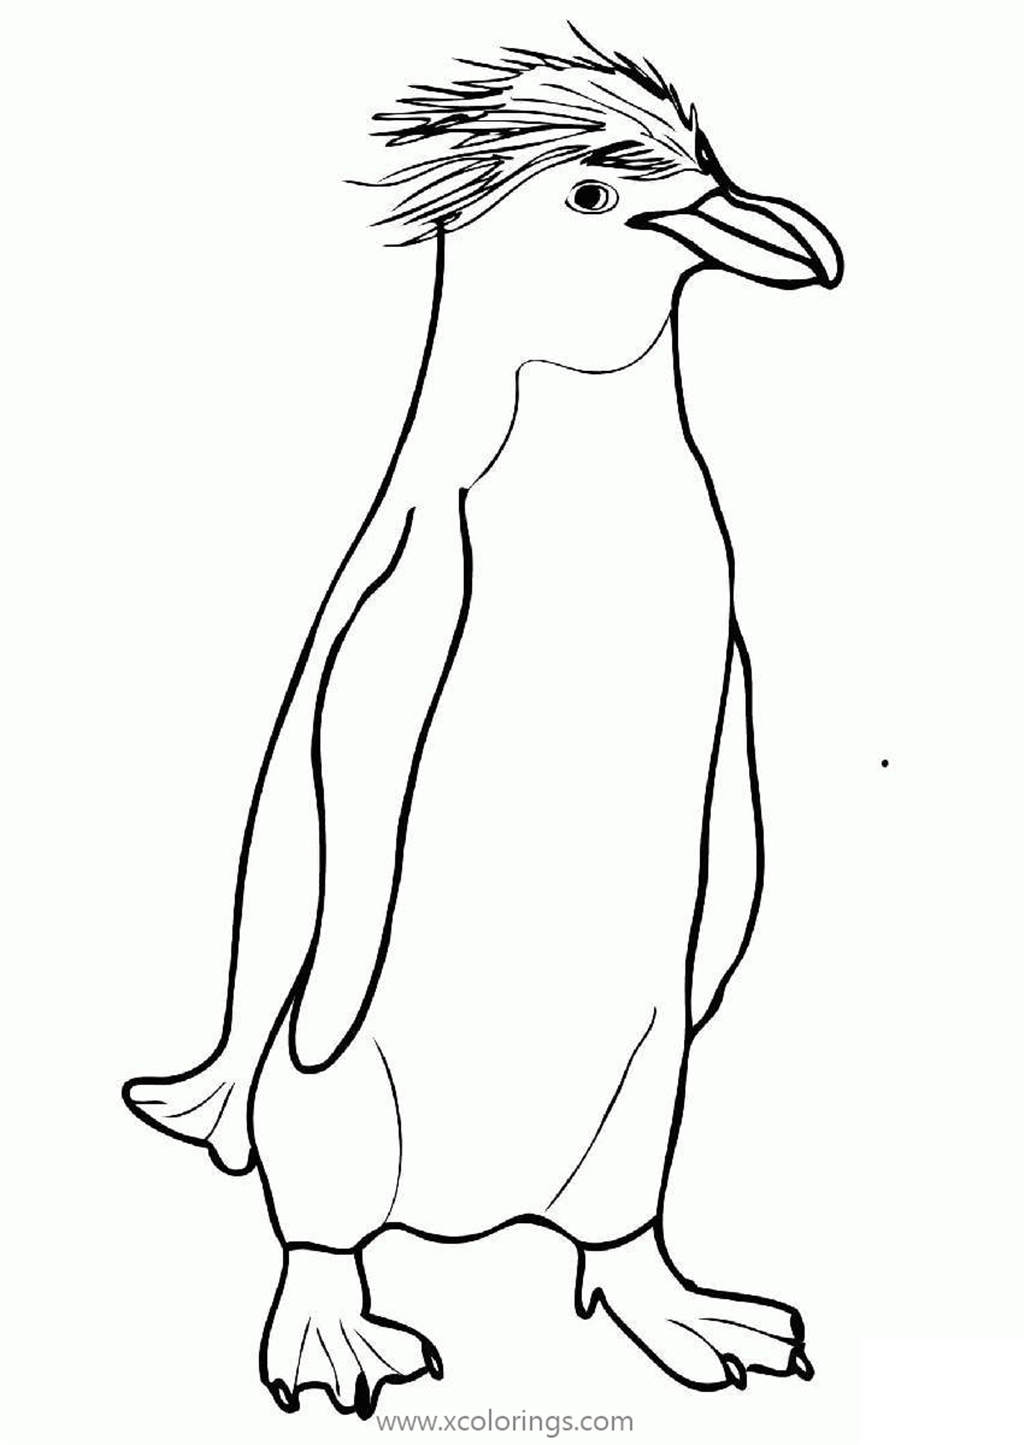 Free Fiordland Penguin Coloring Pages printable